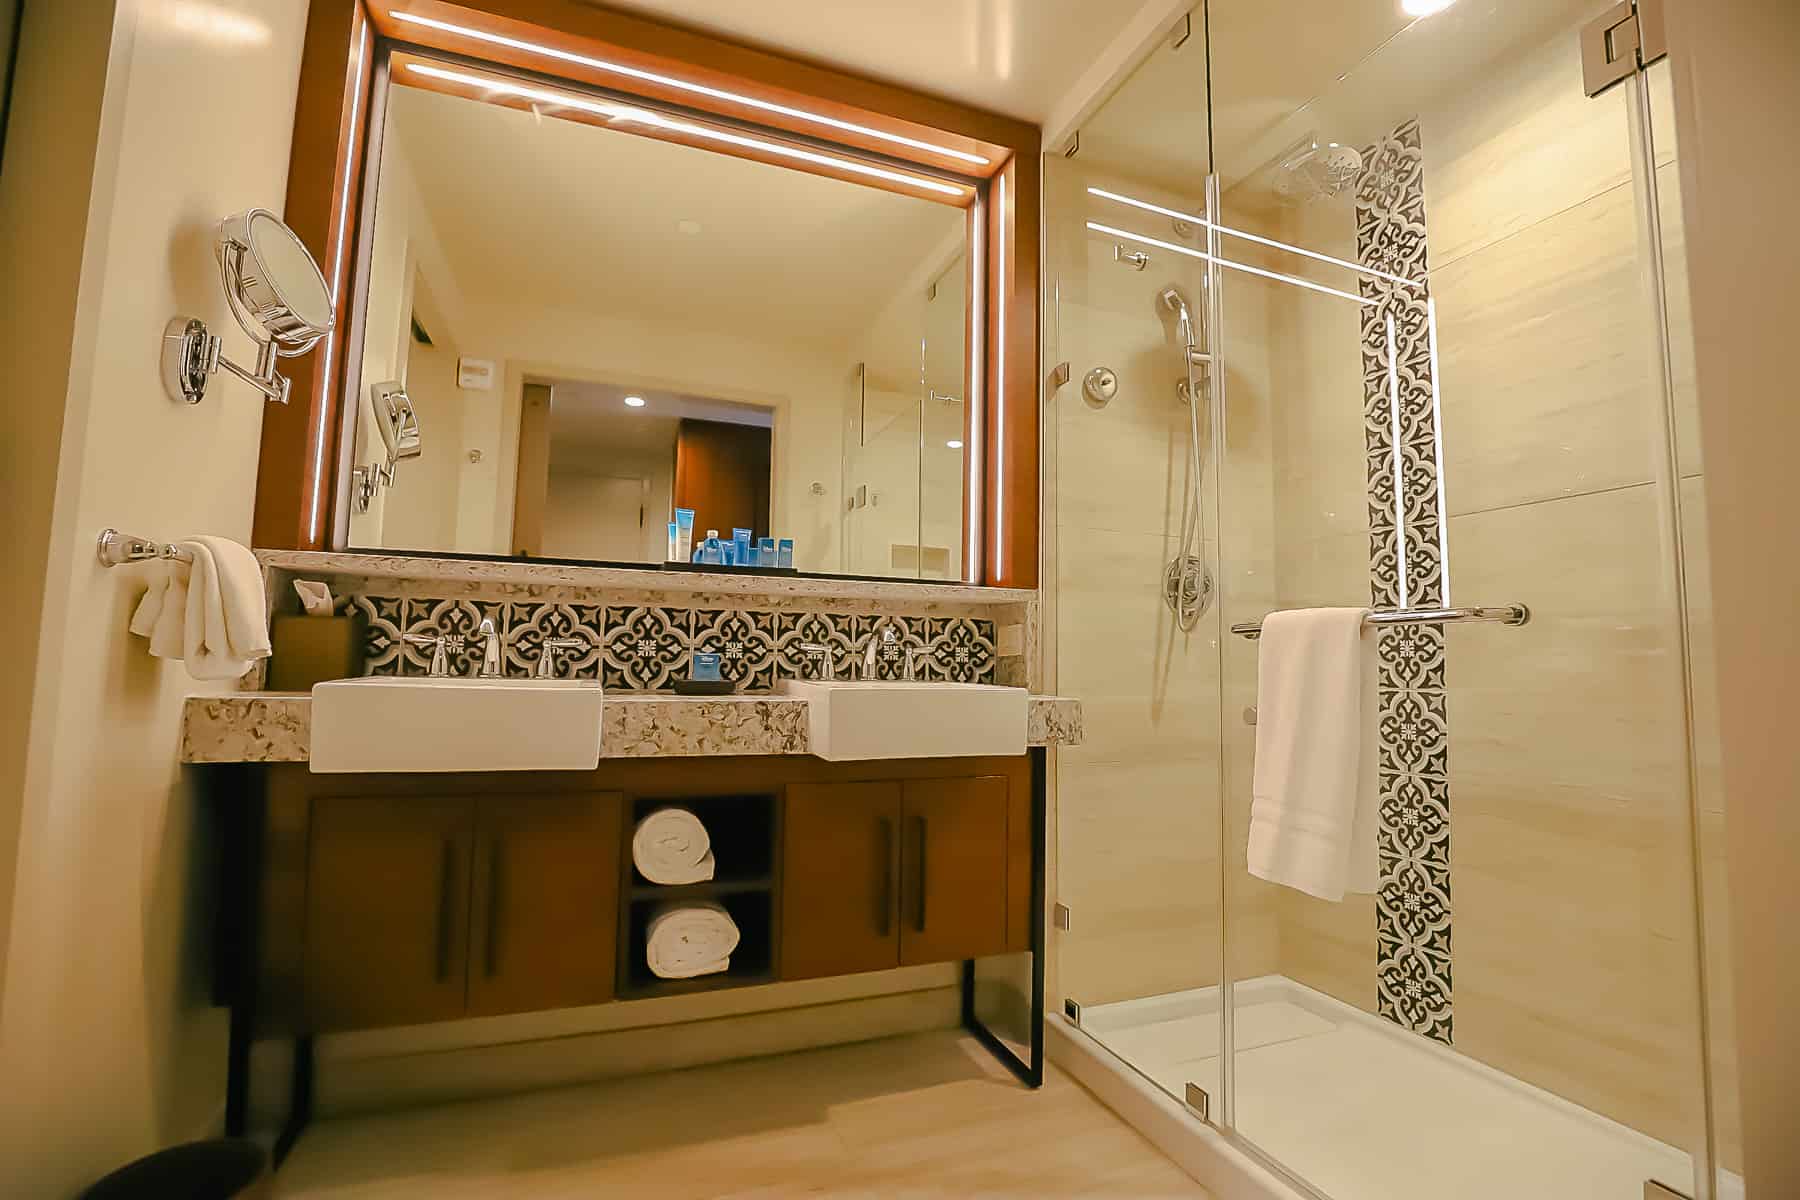 guest bath showing storage space, two sinks, and shower